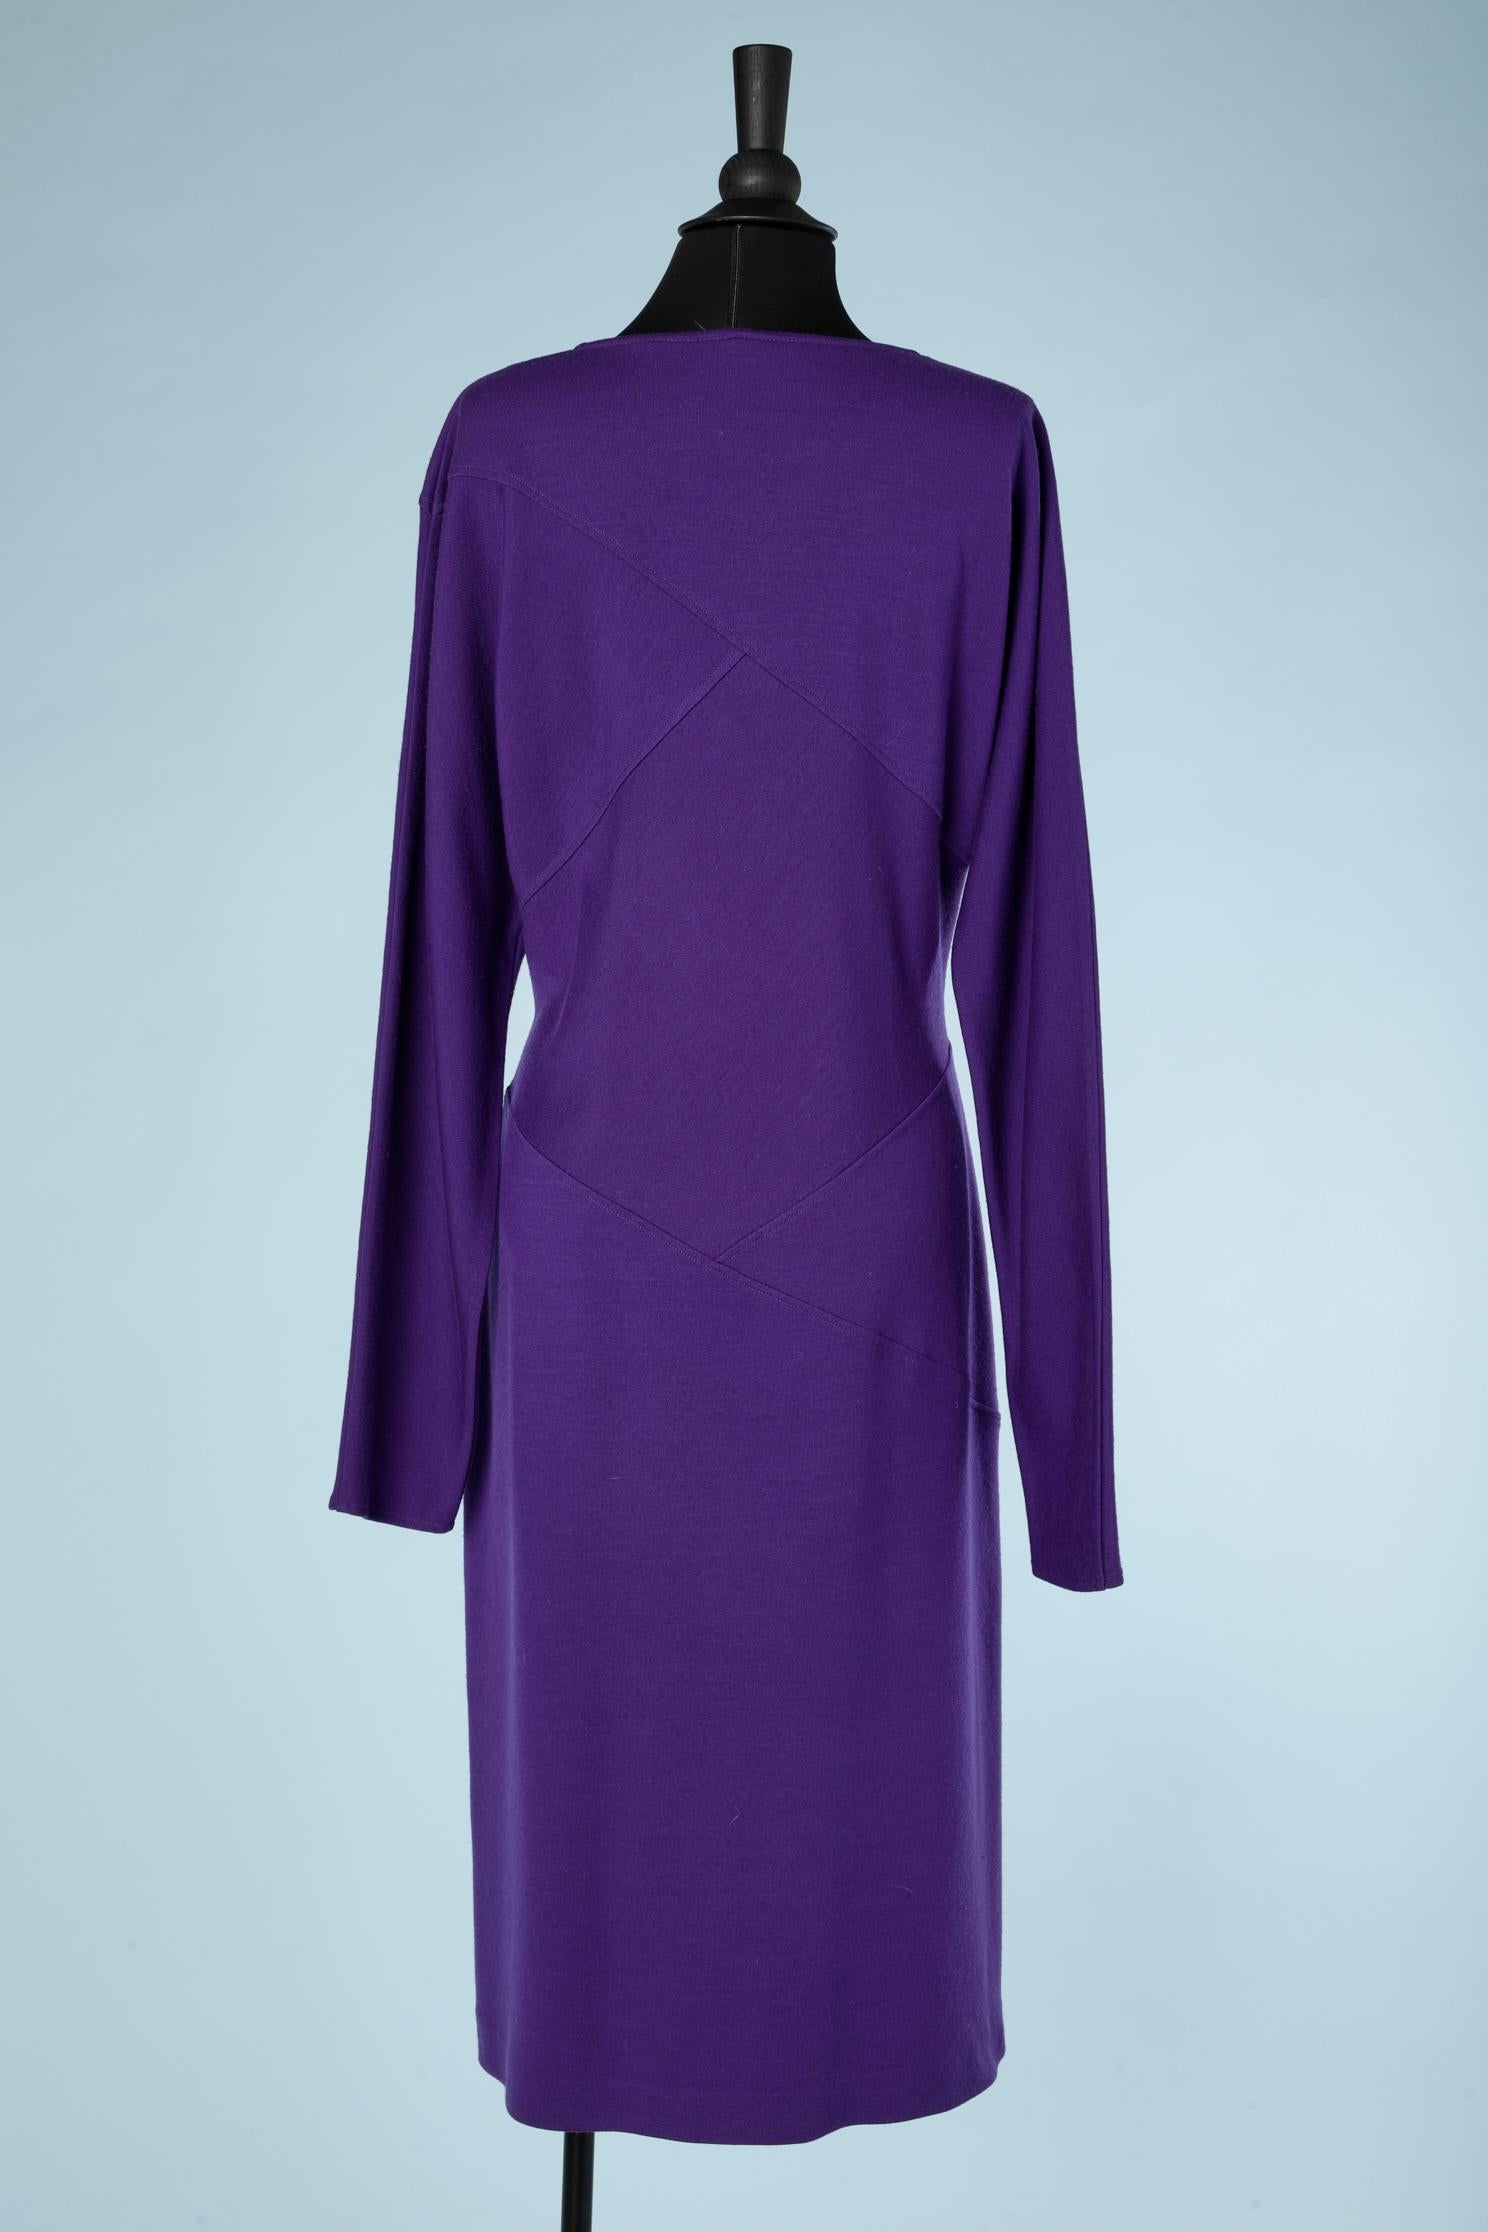 Wool jersey purple dress with cut-work Missoni for Bullock's  In Excellent Condition For Sale In Saint-Ouen-Sur-Seine, FR